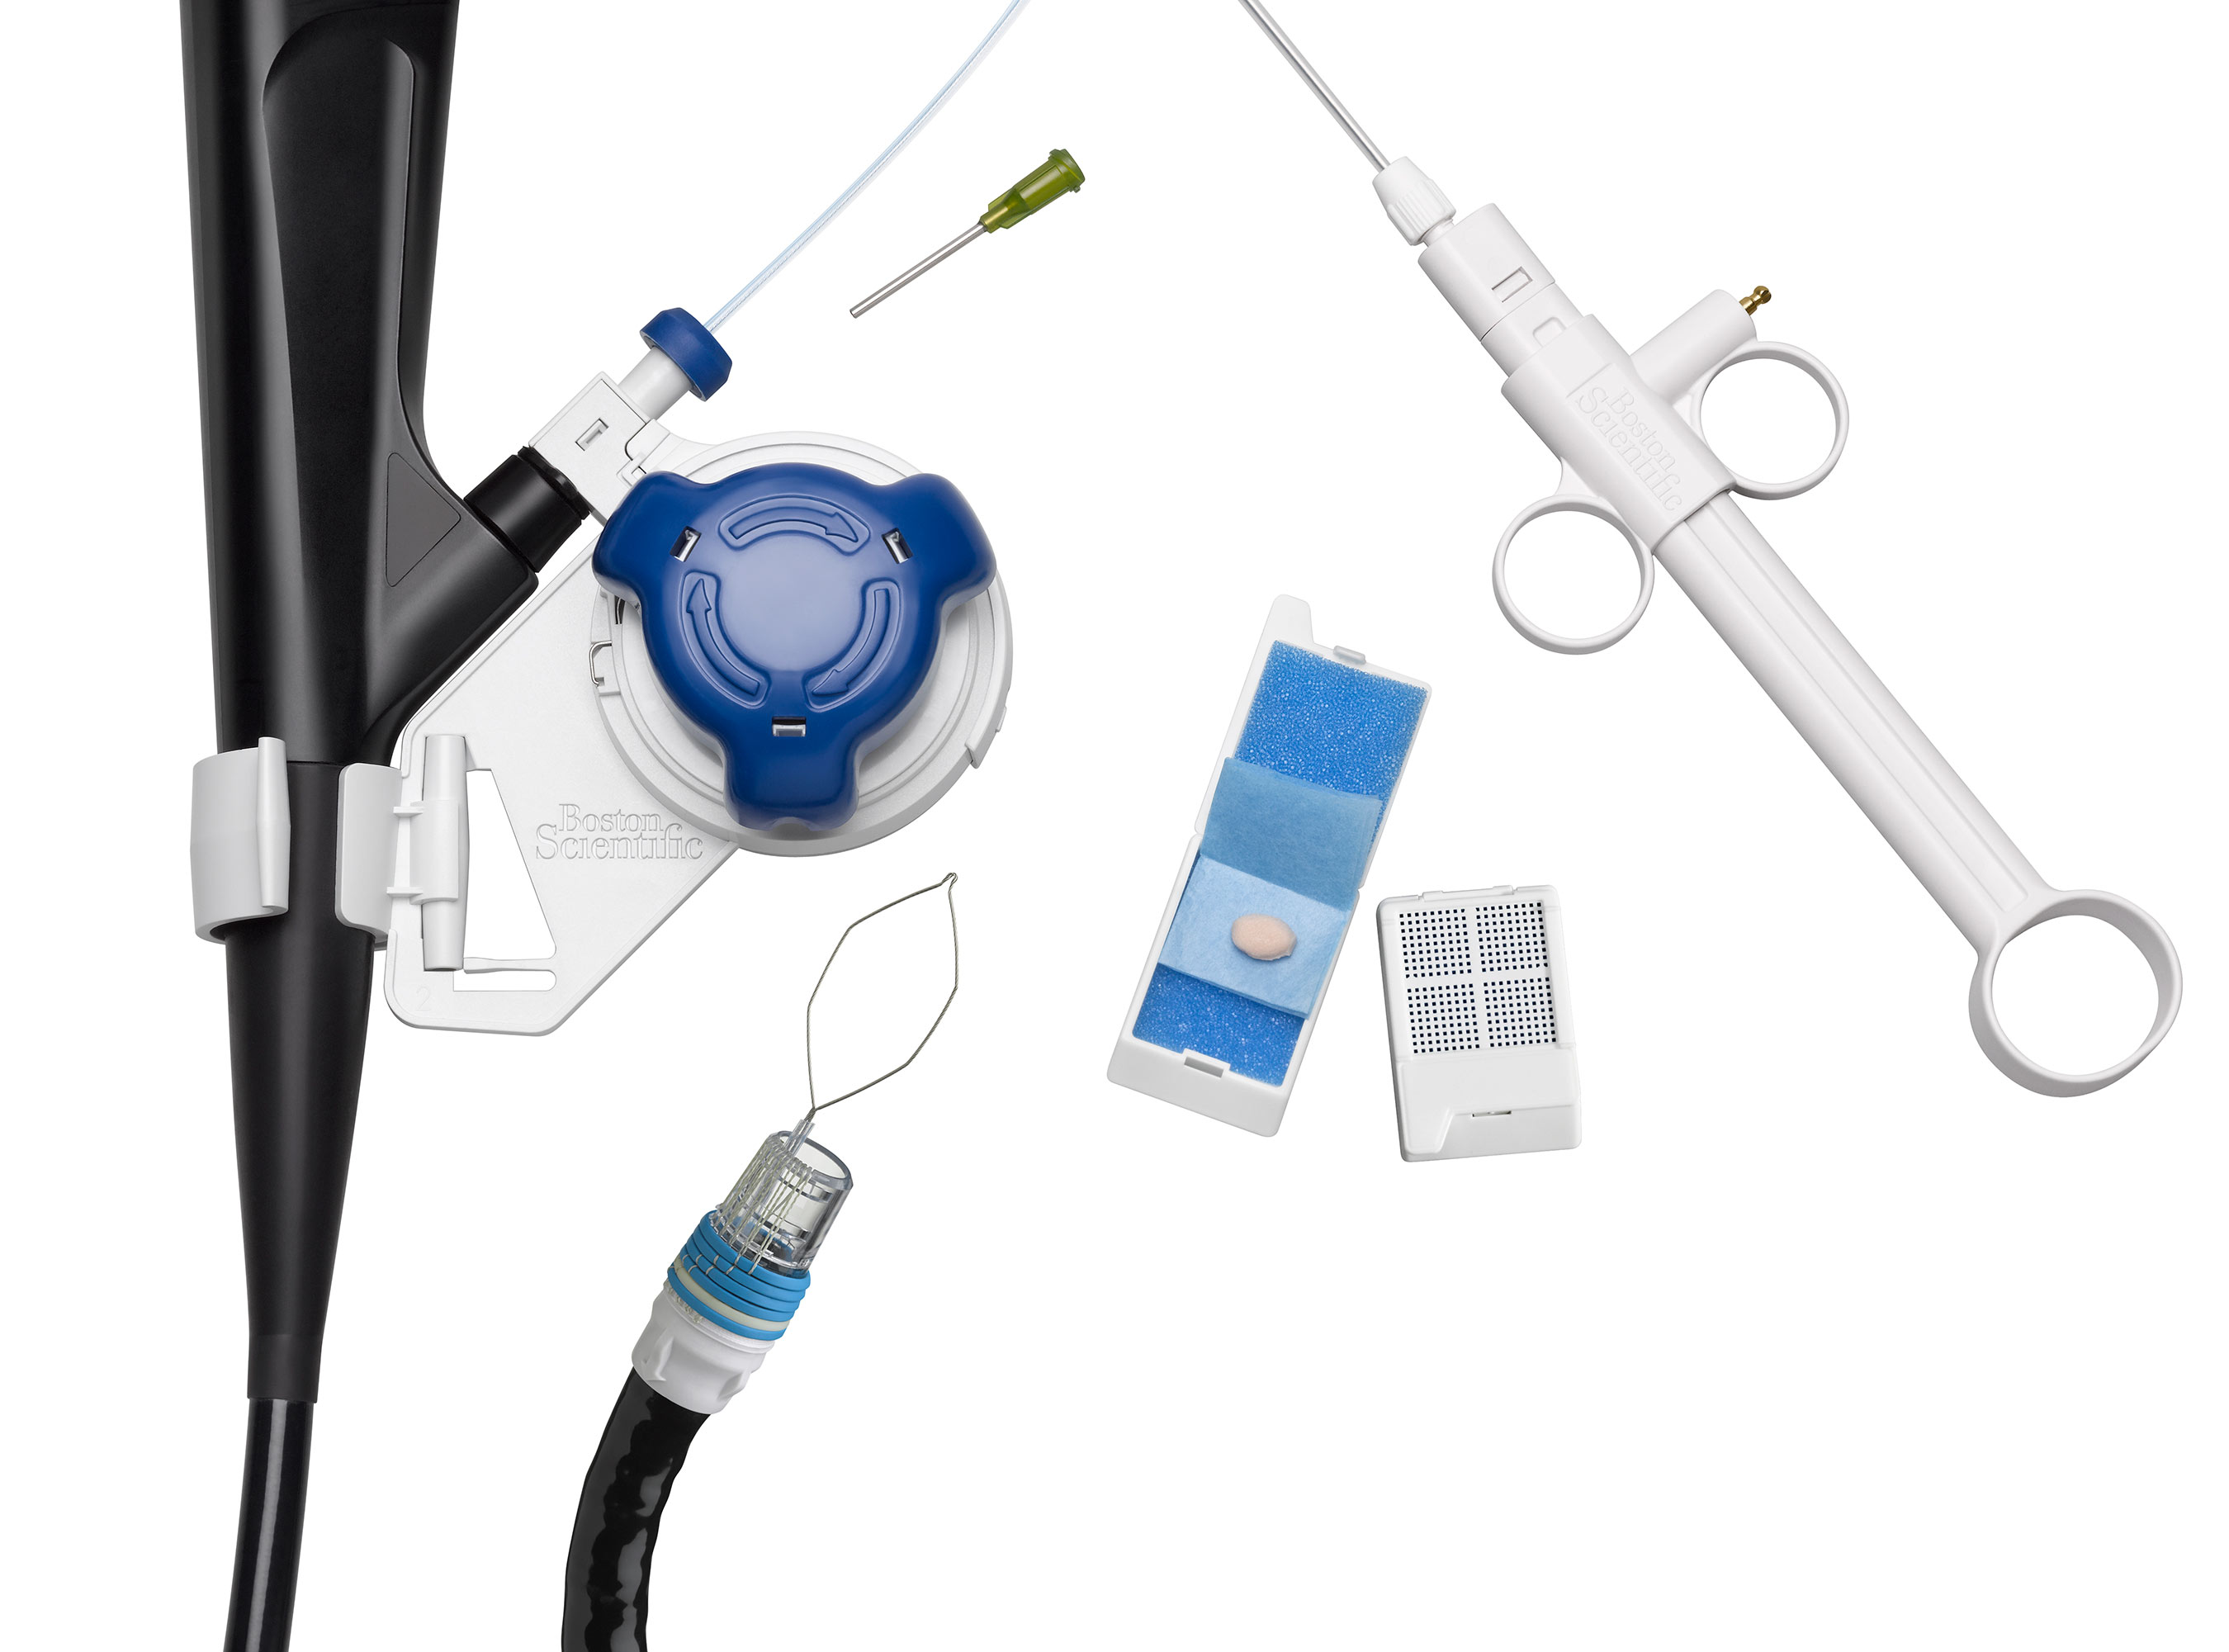 The Captivator™ EMR Device is designed for endoscopic mucosal resection (EMR) in the upper Gastrointestinal (GI) tract.